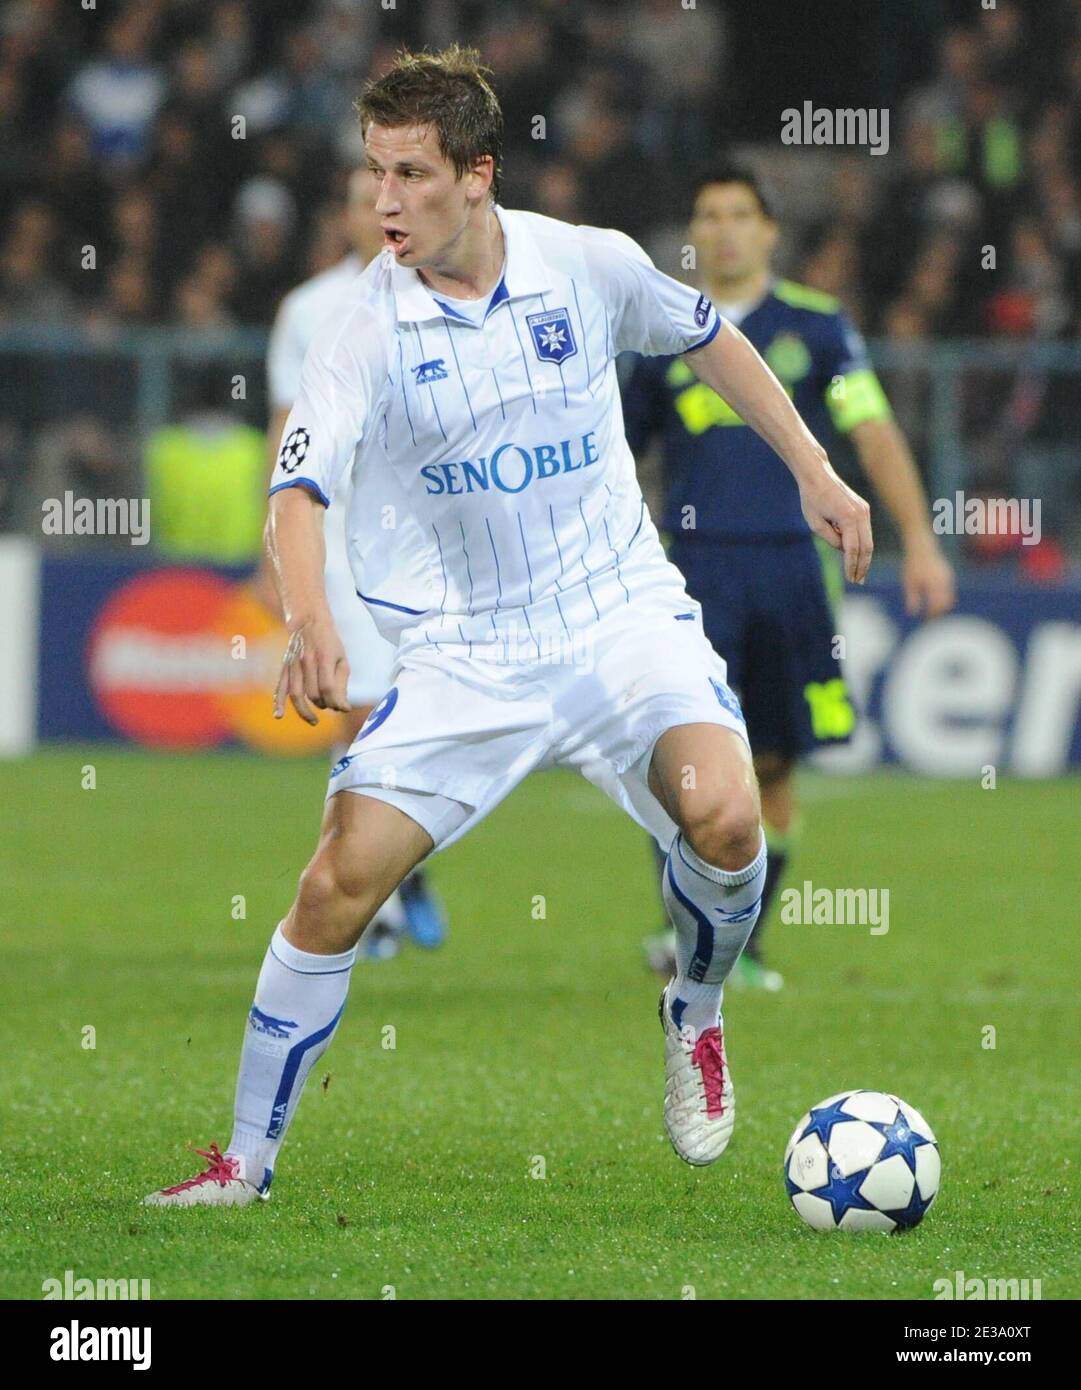 AJ Auxerre's Dariusz Dudka during the UEFA Champions League soccer match, group G, AJ Auxerre vs AFC Ajax at L'Abbe Deschamps stadium in Auxerre, France on November 3, 2010. Auxerre won 2-1. Photo by Christian Liewig/ABACAPRESS.COM Stock Photo